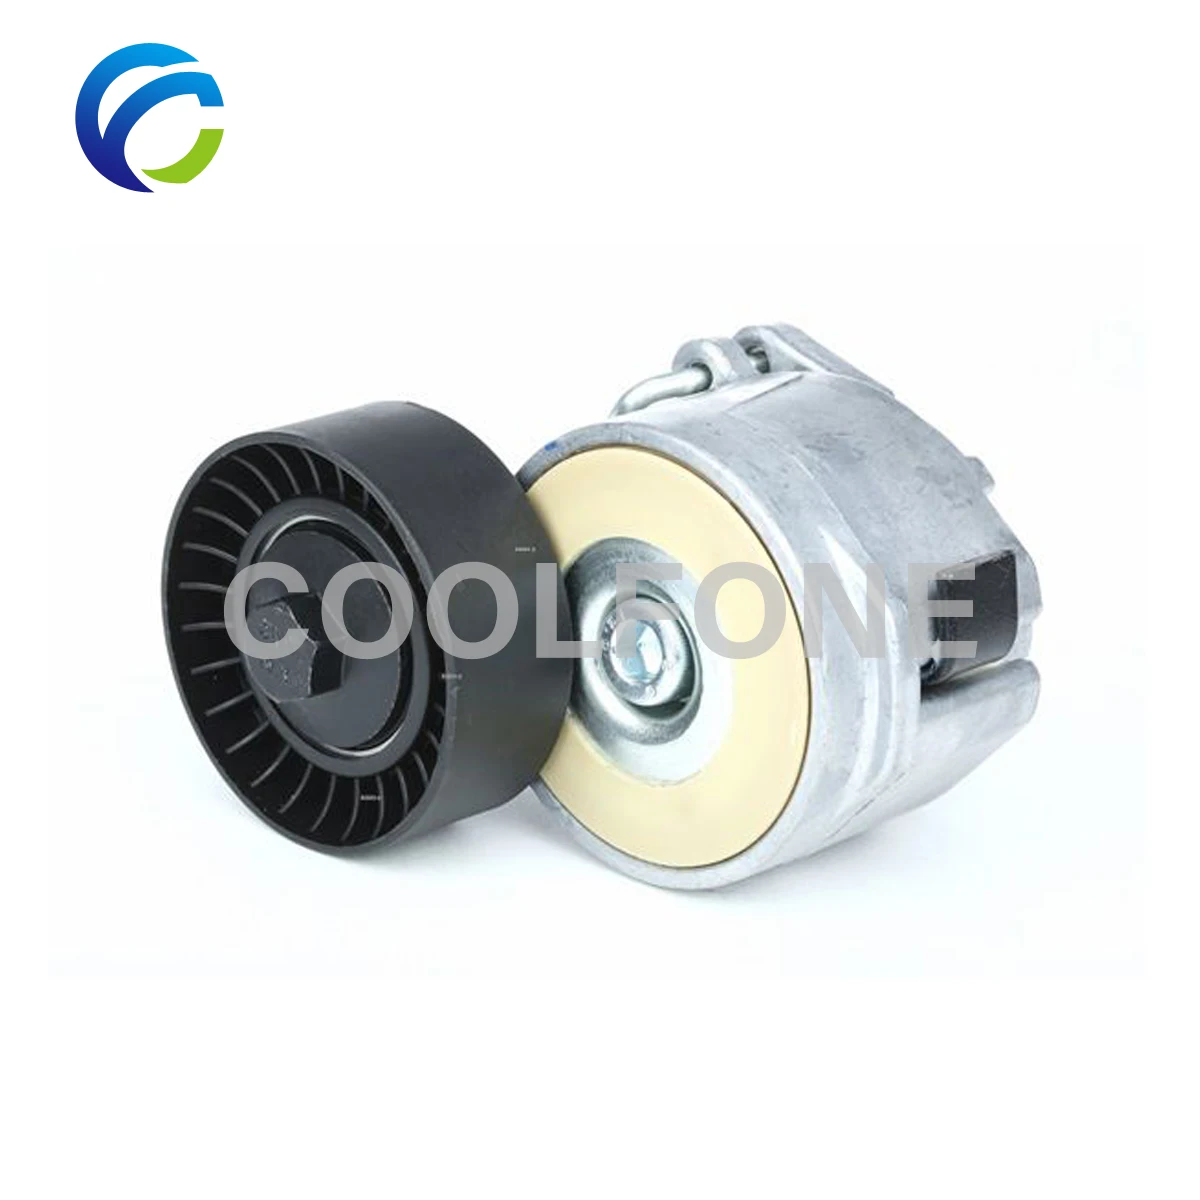 

Drive Belt Automatic Tensioner for VAUXHALL VECTRA SIGNUM ASTRA ZAFIRA COMBO 1.6 1.9D 2.0D 51773551 55190813 55202380 6340557